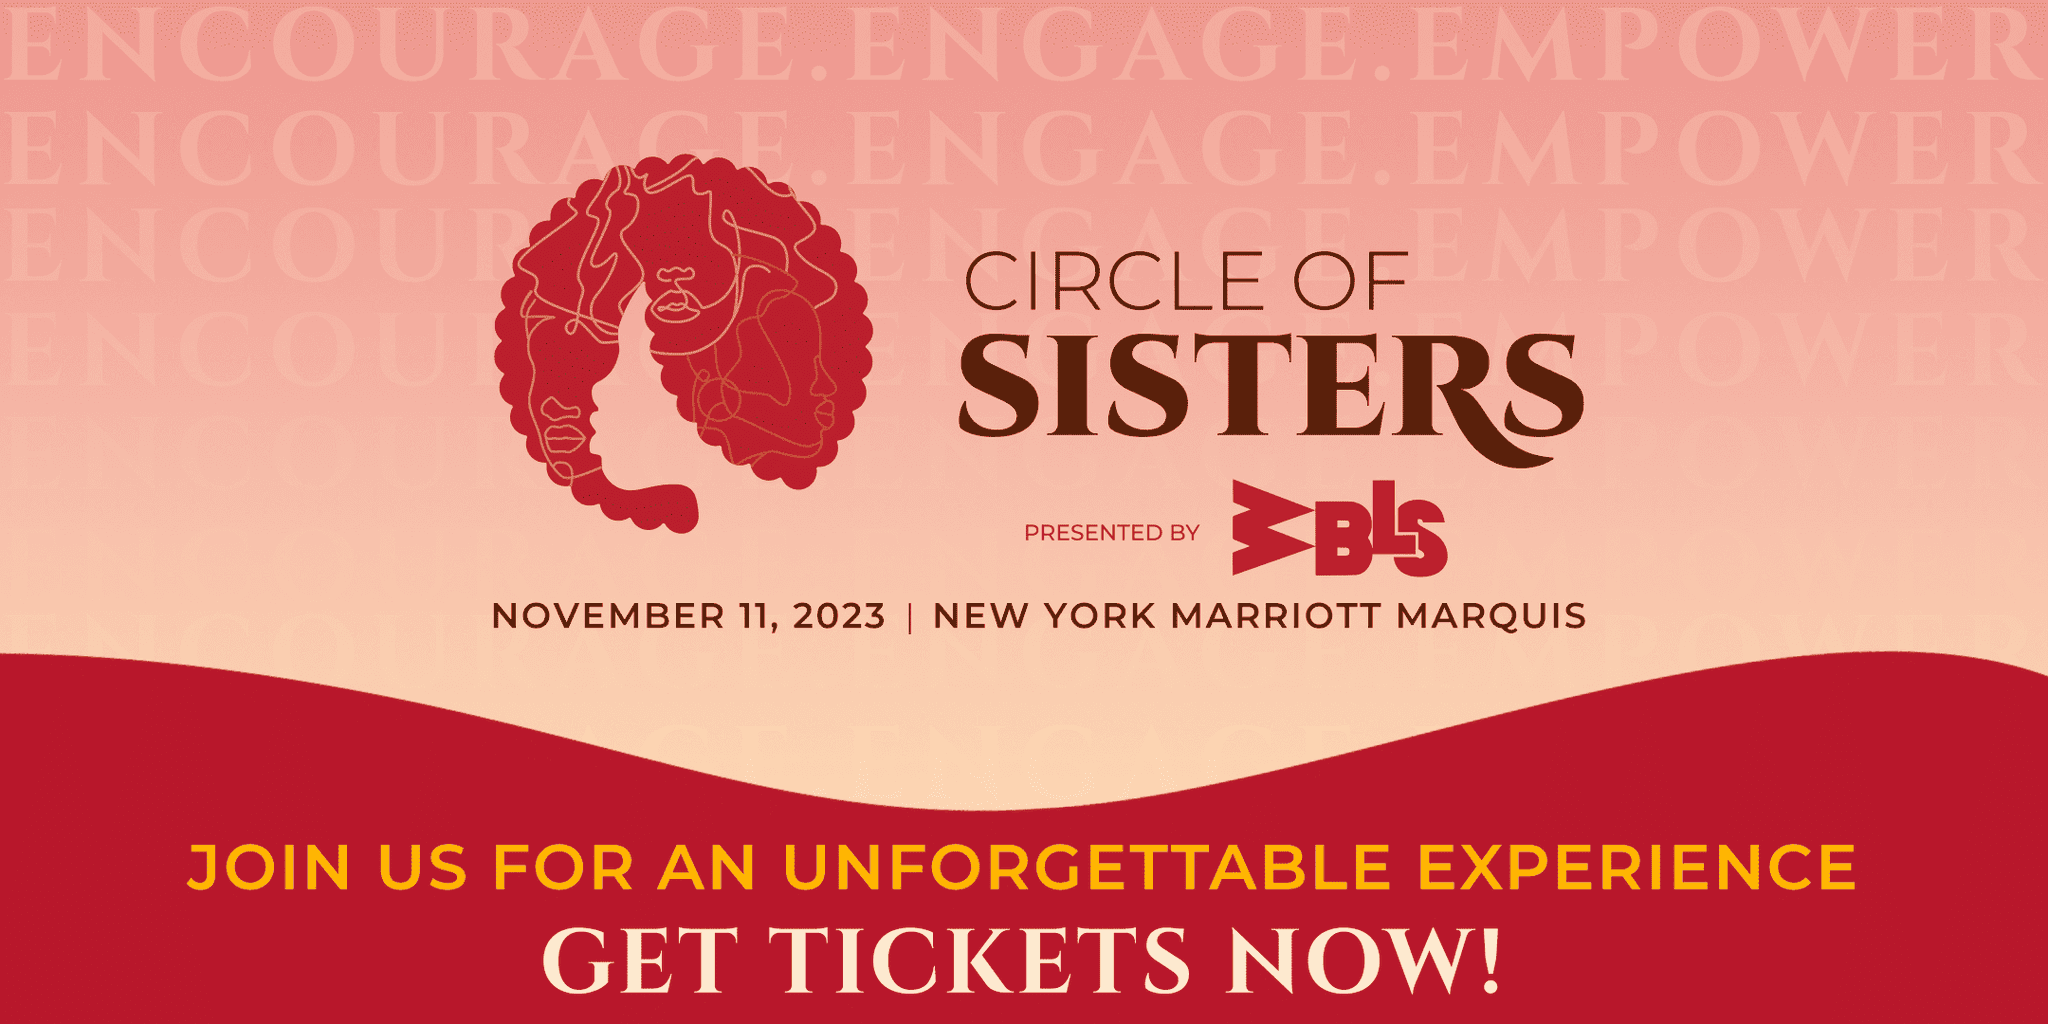 WBLS Circle Of Sisters 2023 Is Back!